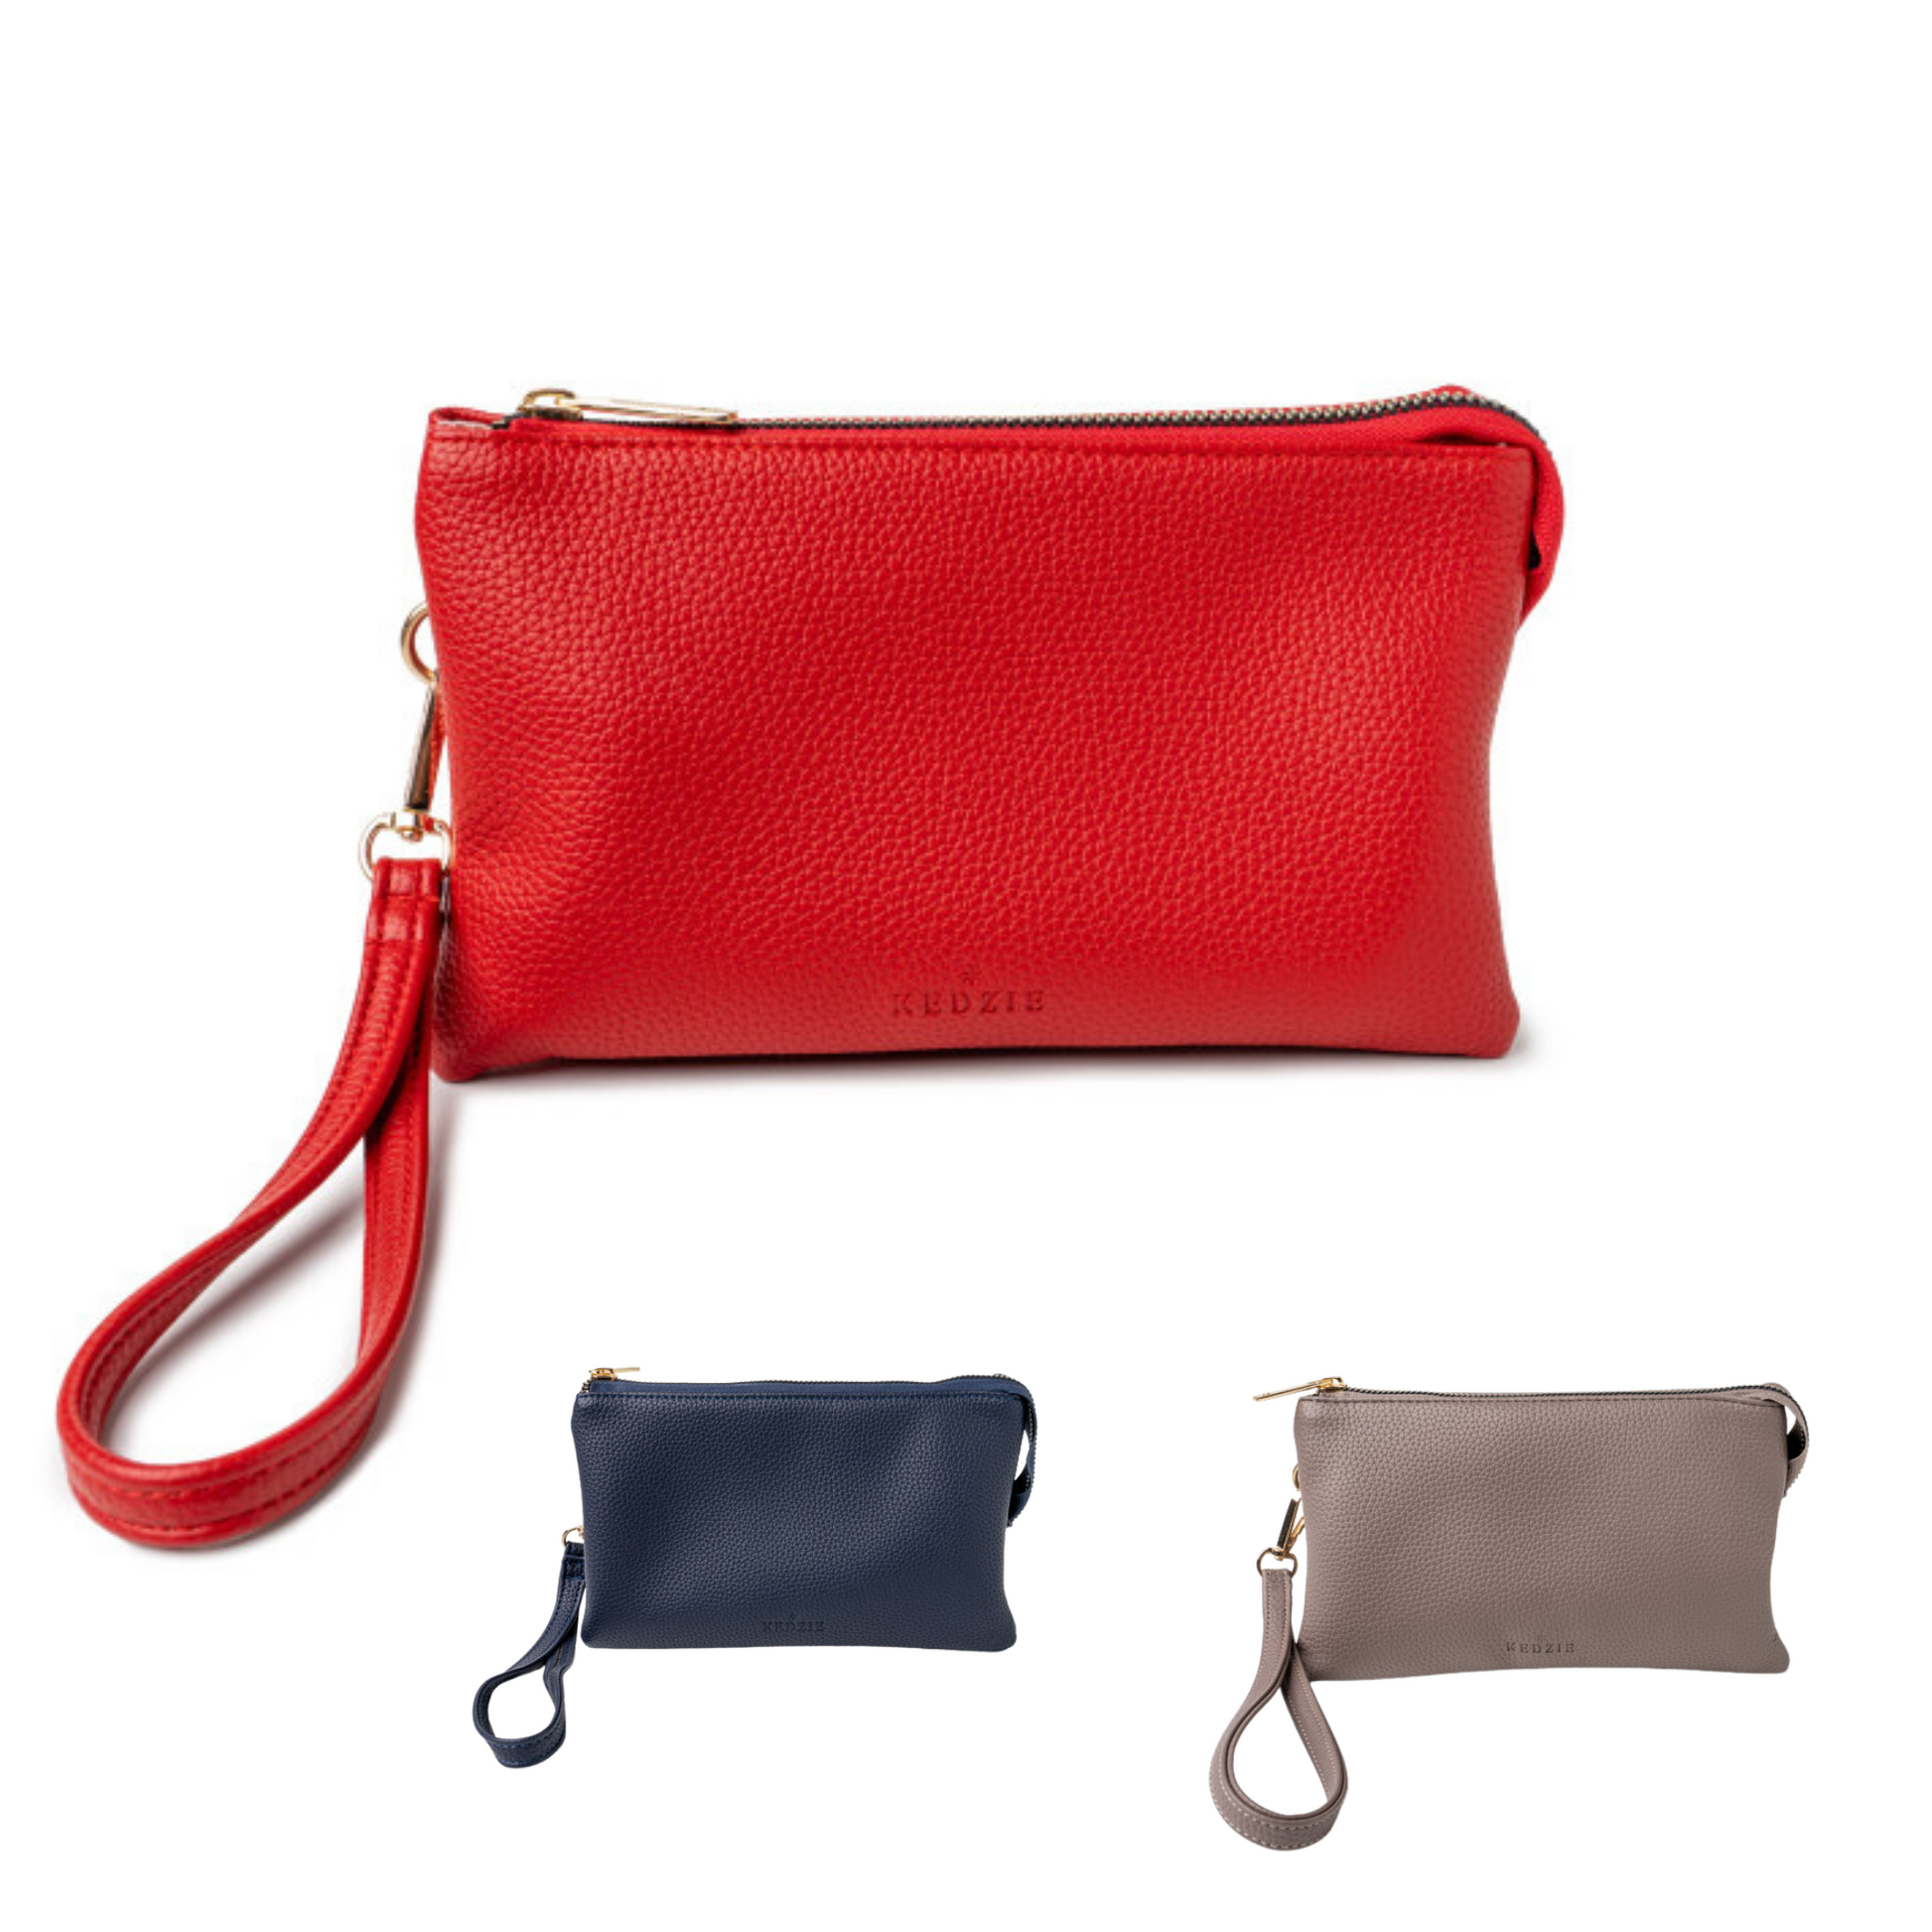 Get a designer look with serious built-in organization. This trending bag is perfectly sized to switch between a crossbody and wristlet, no wallet needed.